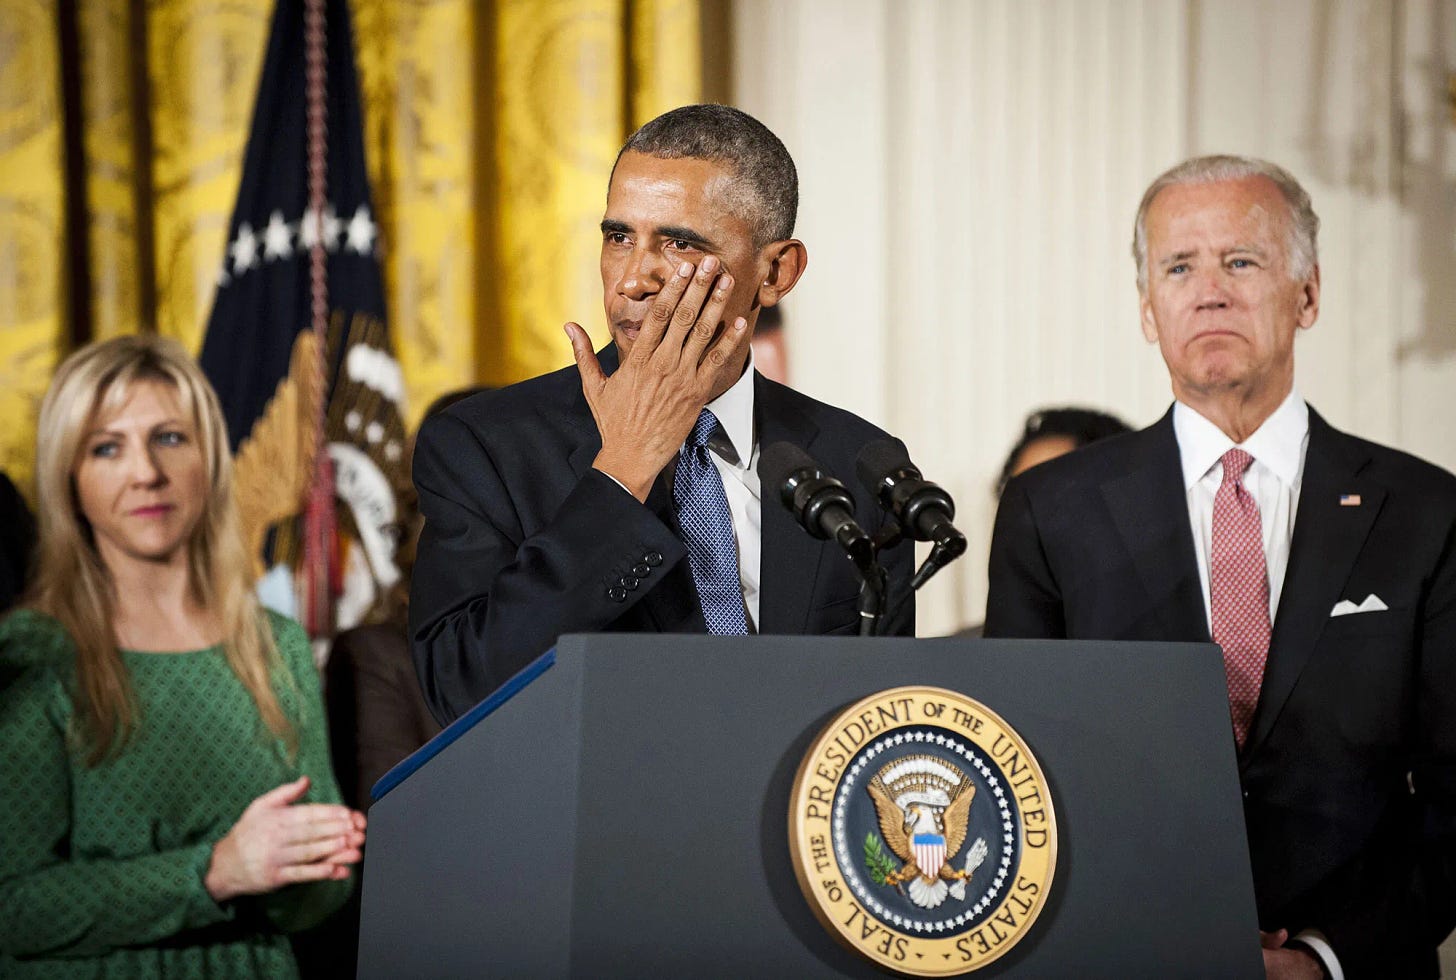 President Obama tearing up at a presidential podium at the White House